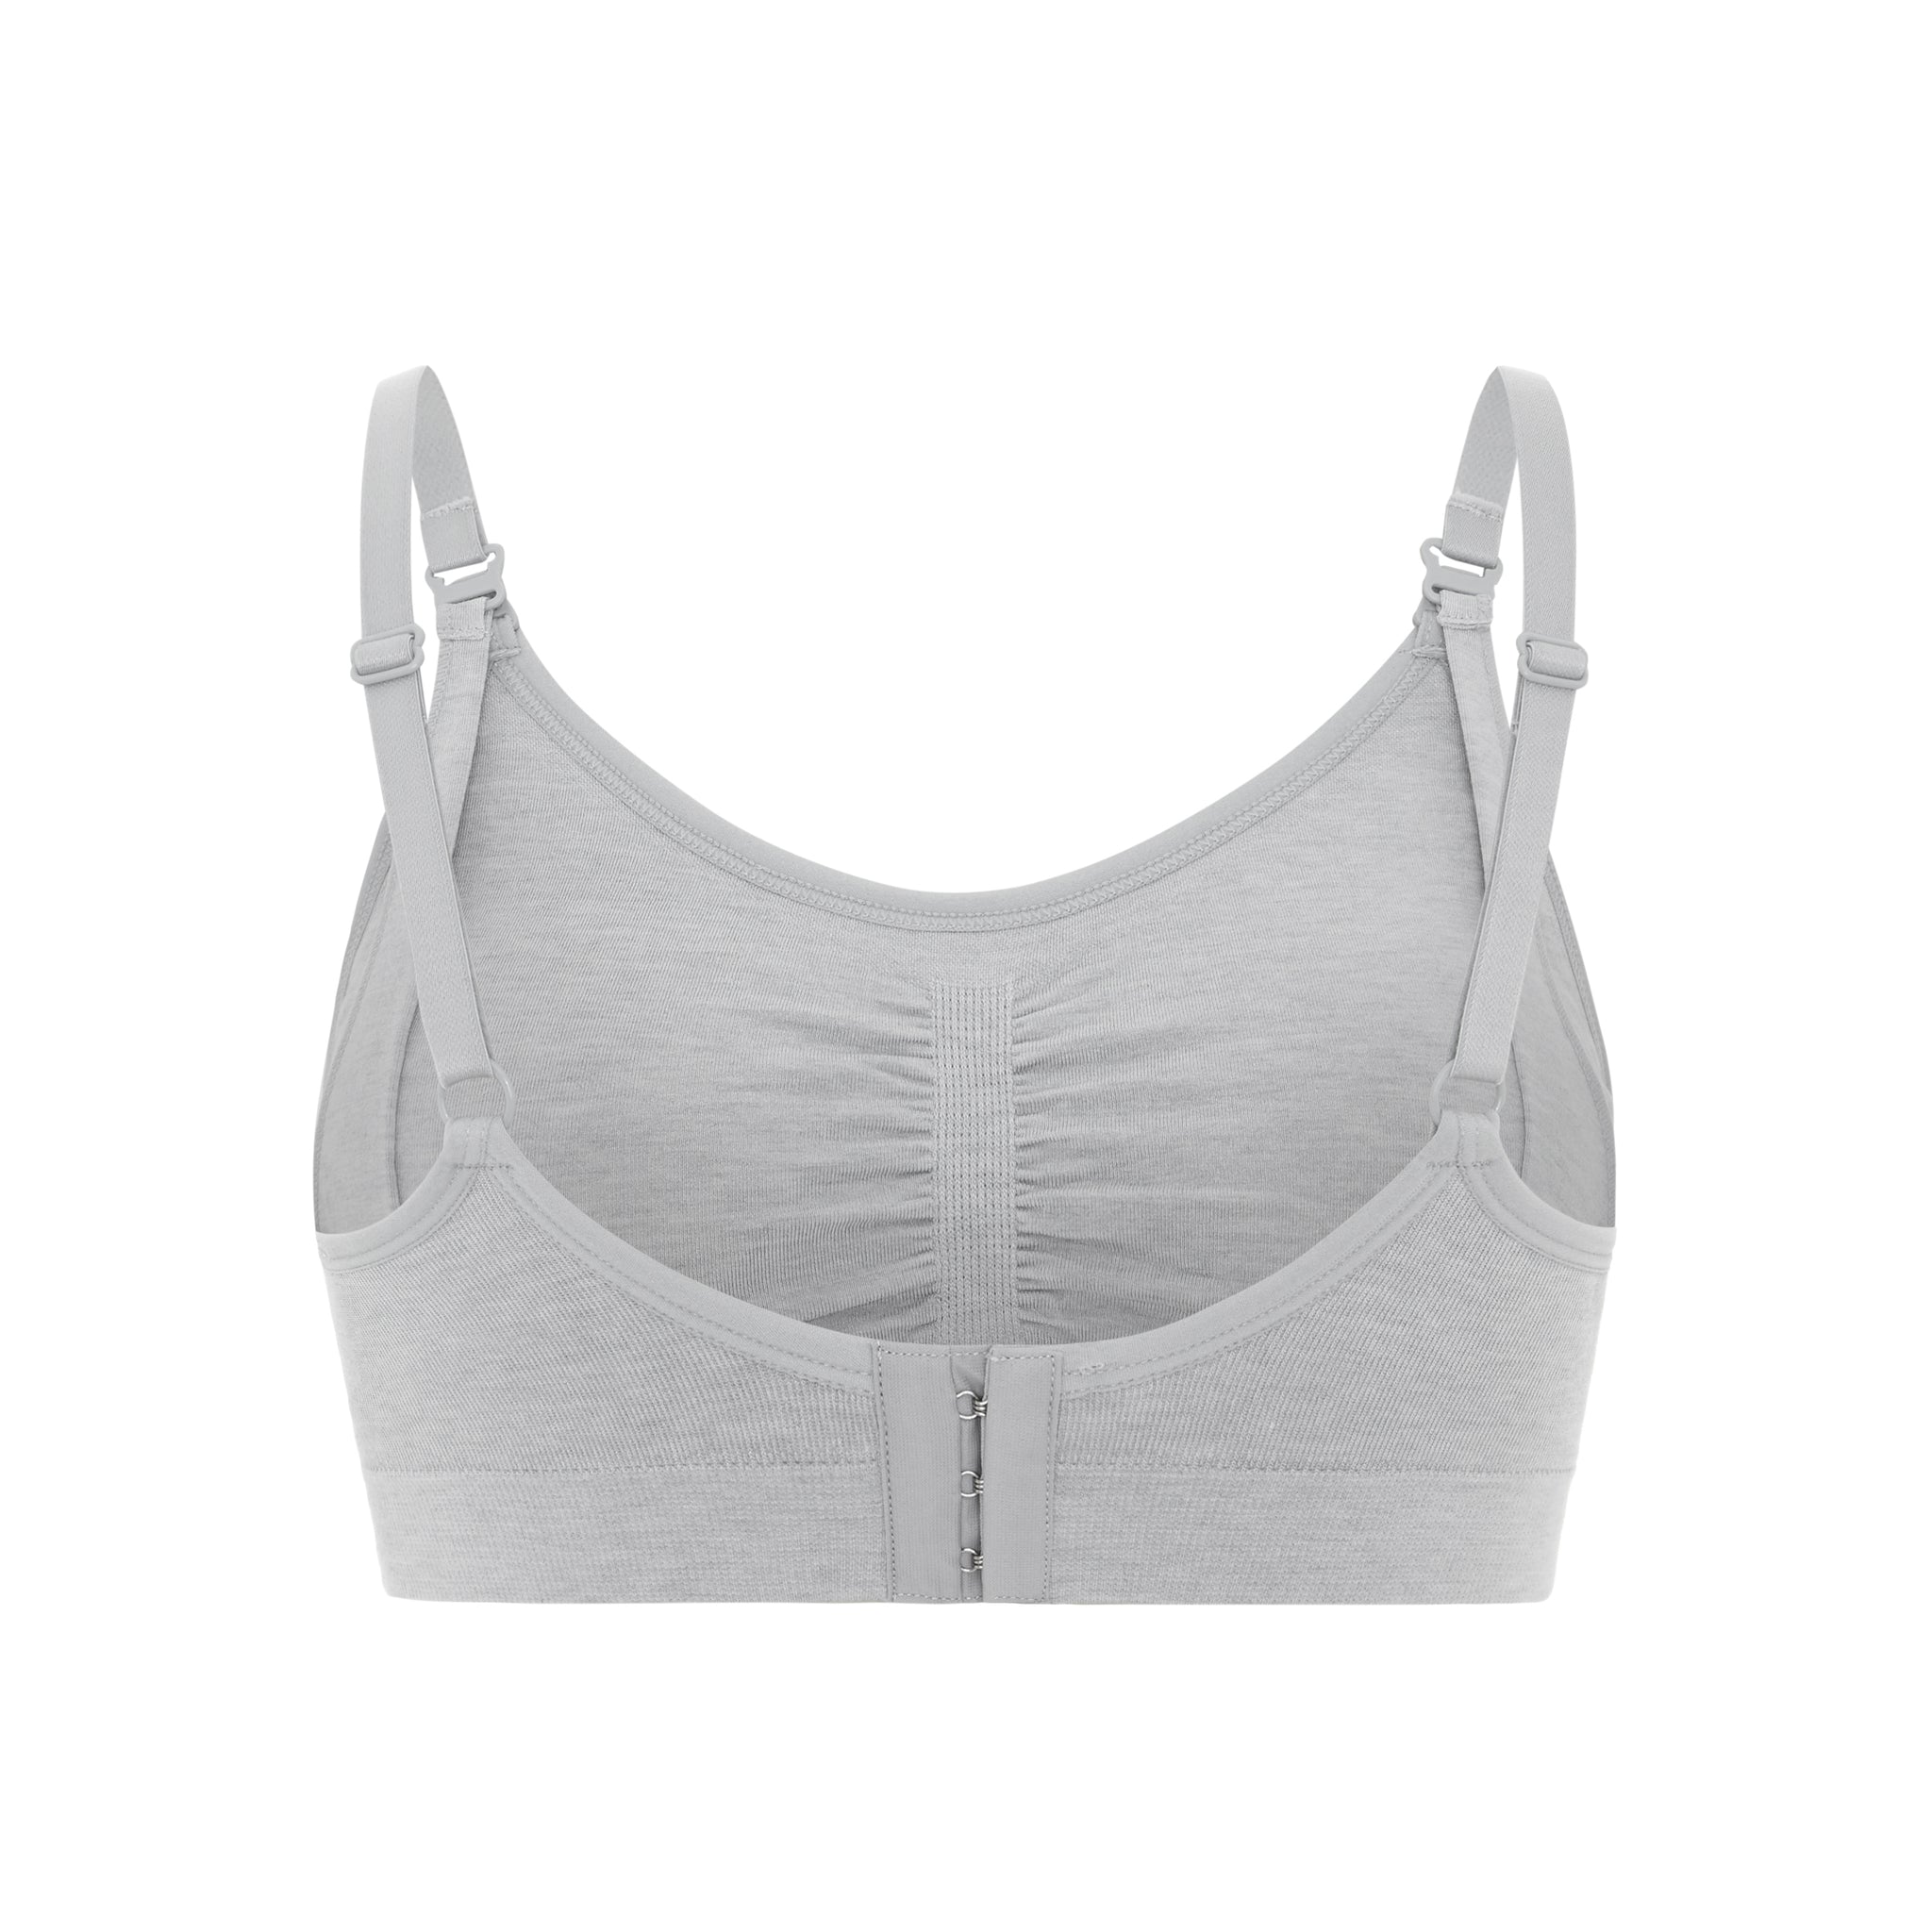 Under Control | 3 pack Nursing Bra Super Soft and Comfy, Comes with Free Hook & Eye Extension Pad (Black, Sand, Heather Grey)